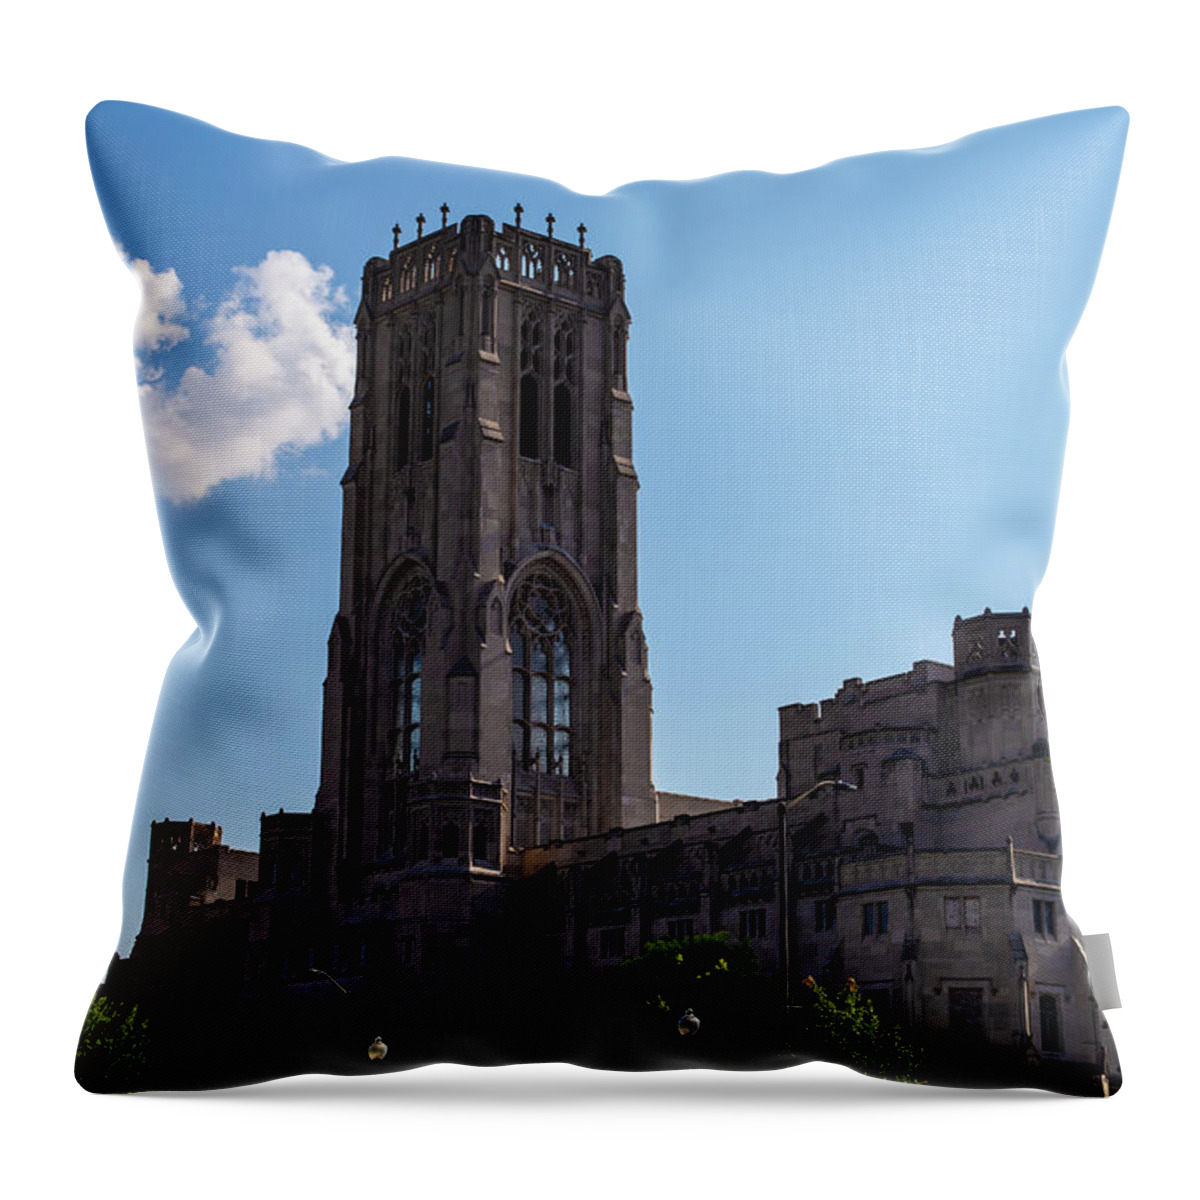 Indianpolis Throw Pillow featuring the photograph Scottish Rite Cathedral by Eldon McGraw